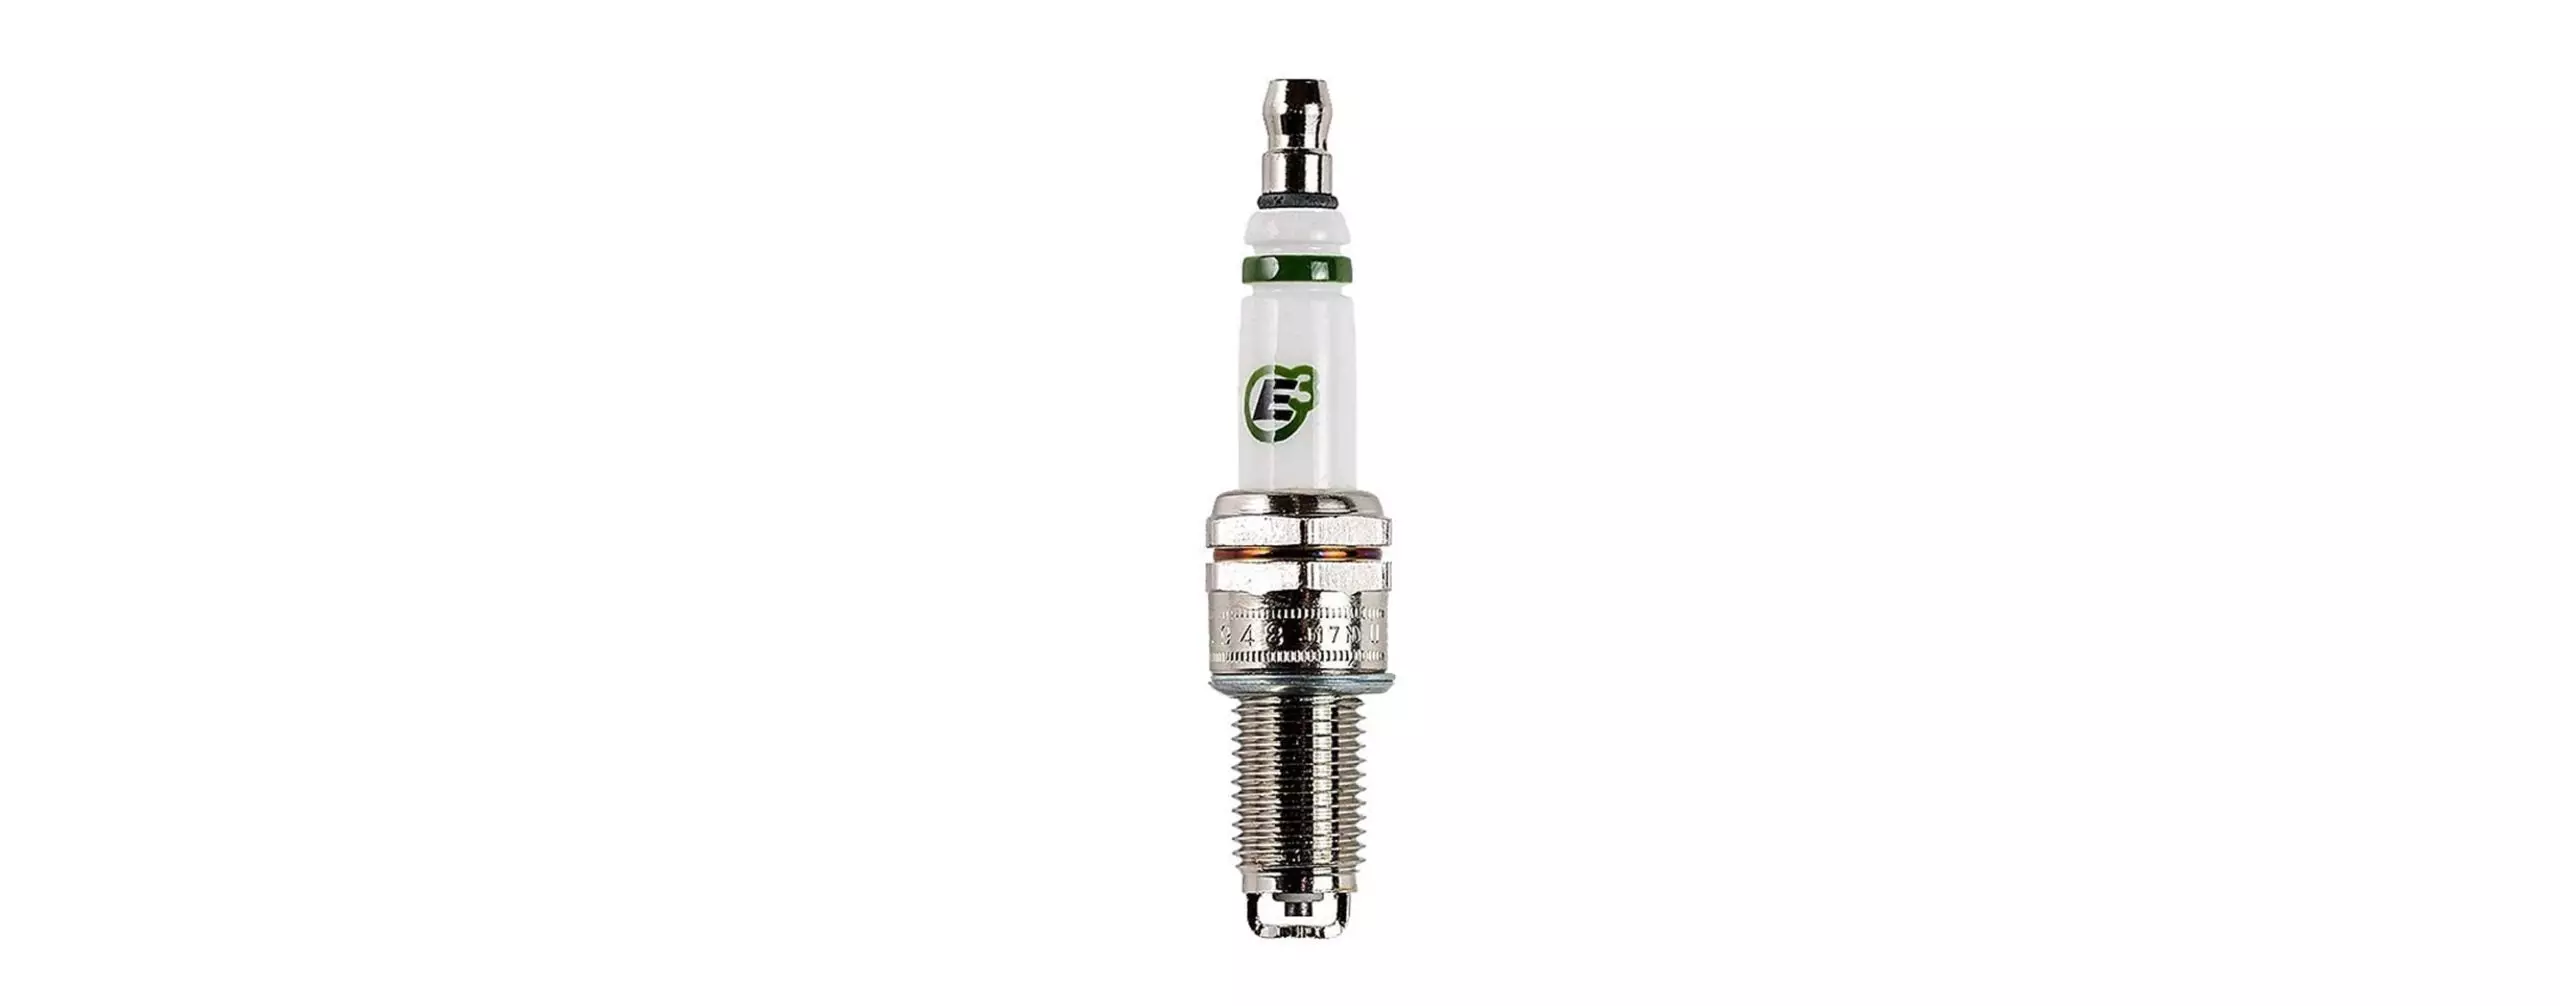 The Best Spark Plugs For Harley-Davidsons (Review & Buying Guide) in 2022